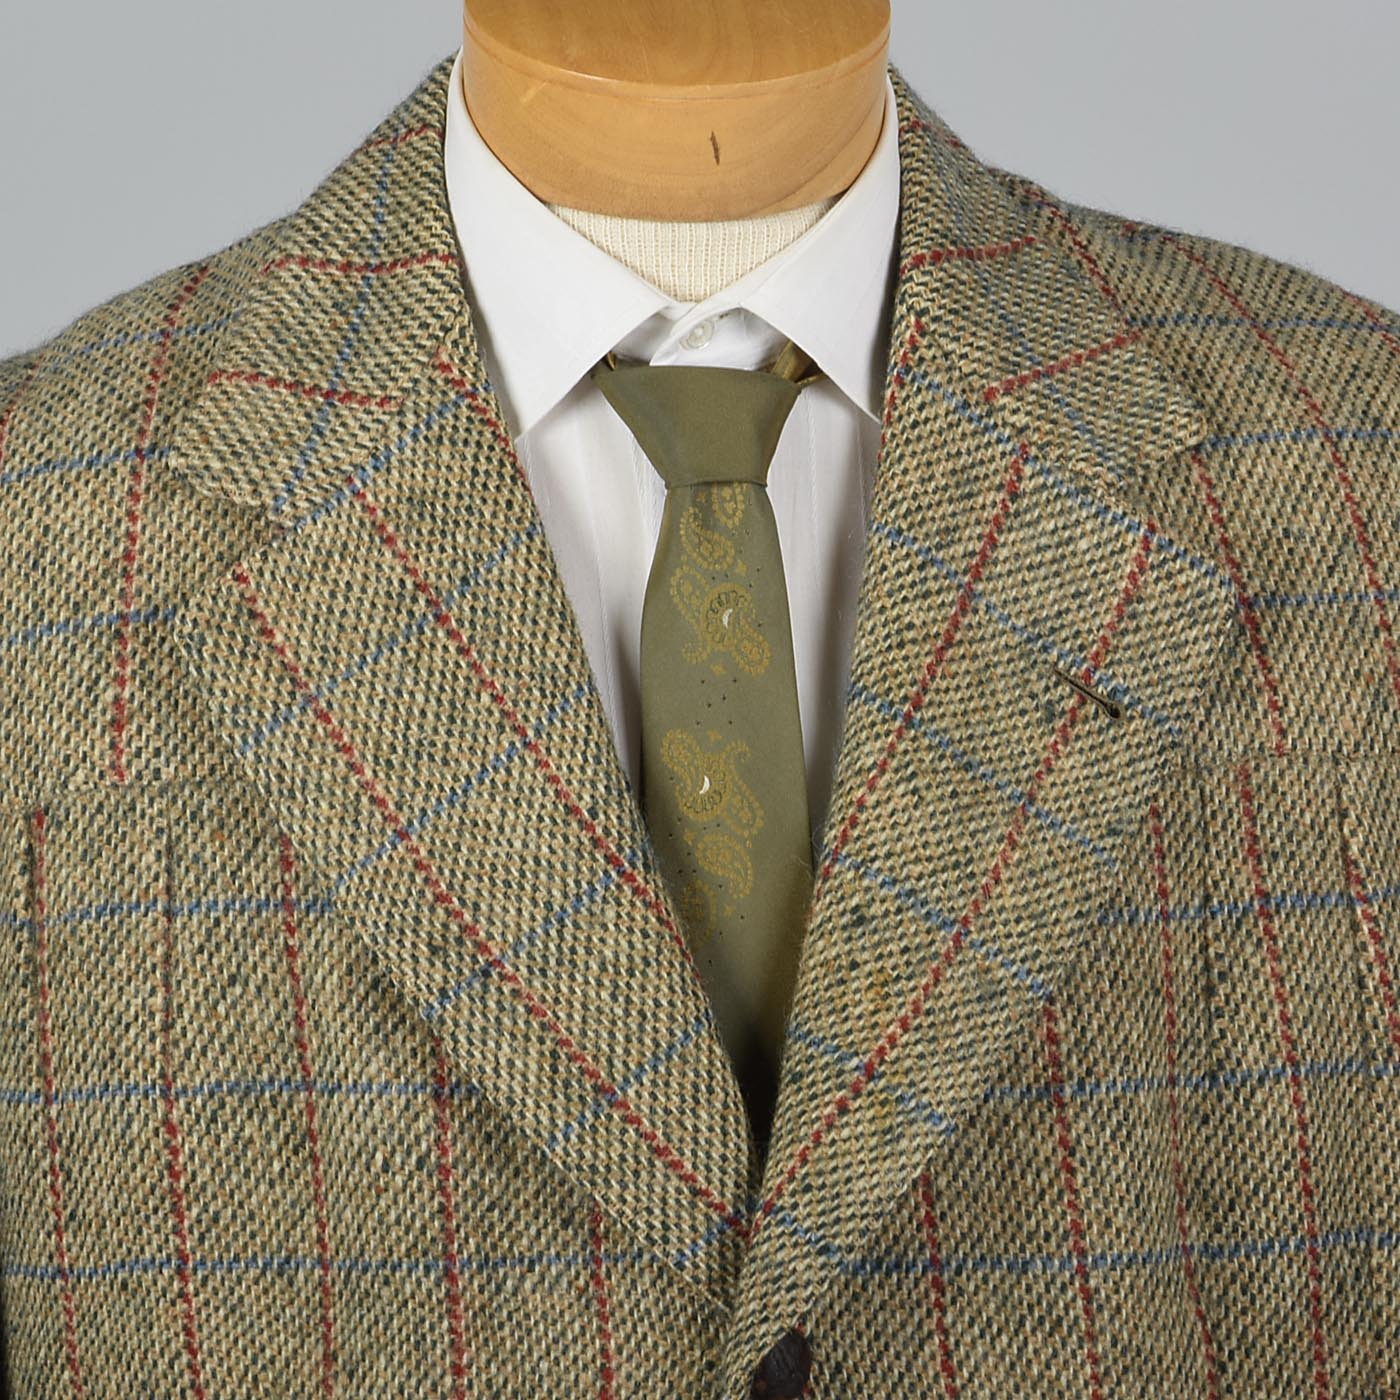 1930s Brown Tweed Jacket with Pleated Back Vent